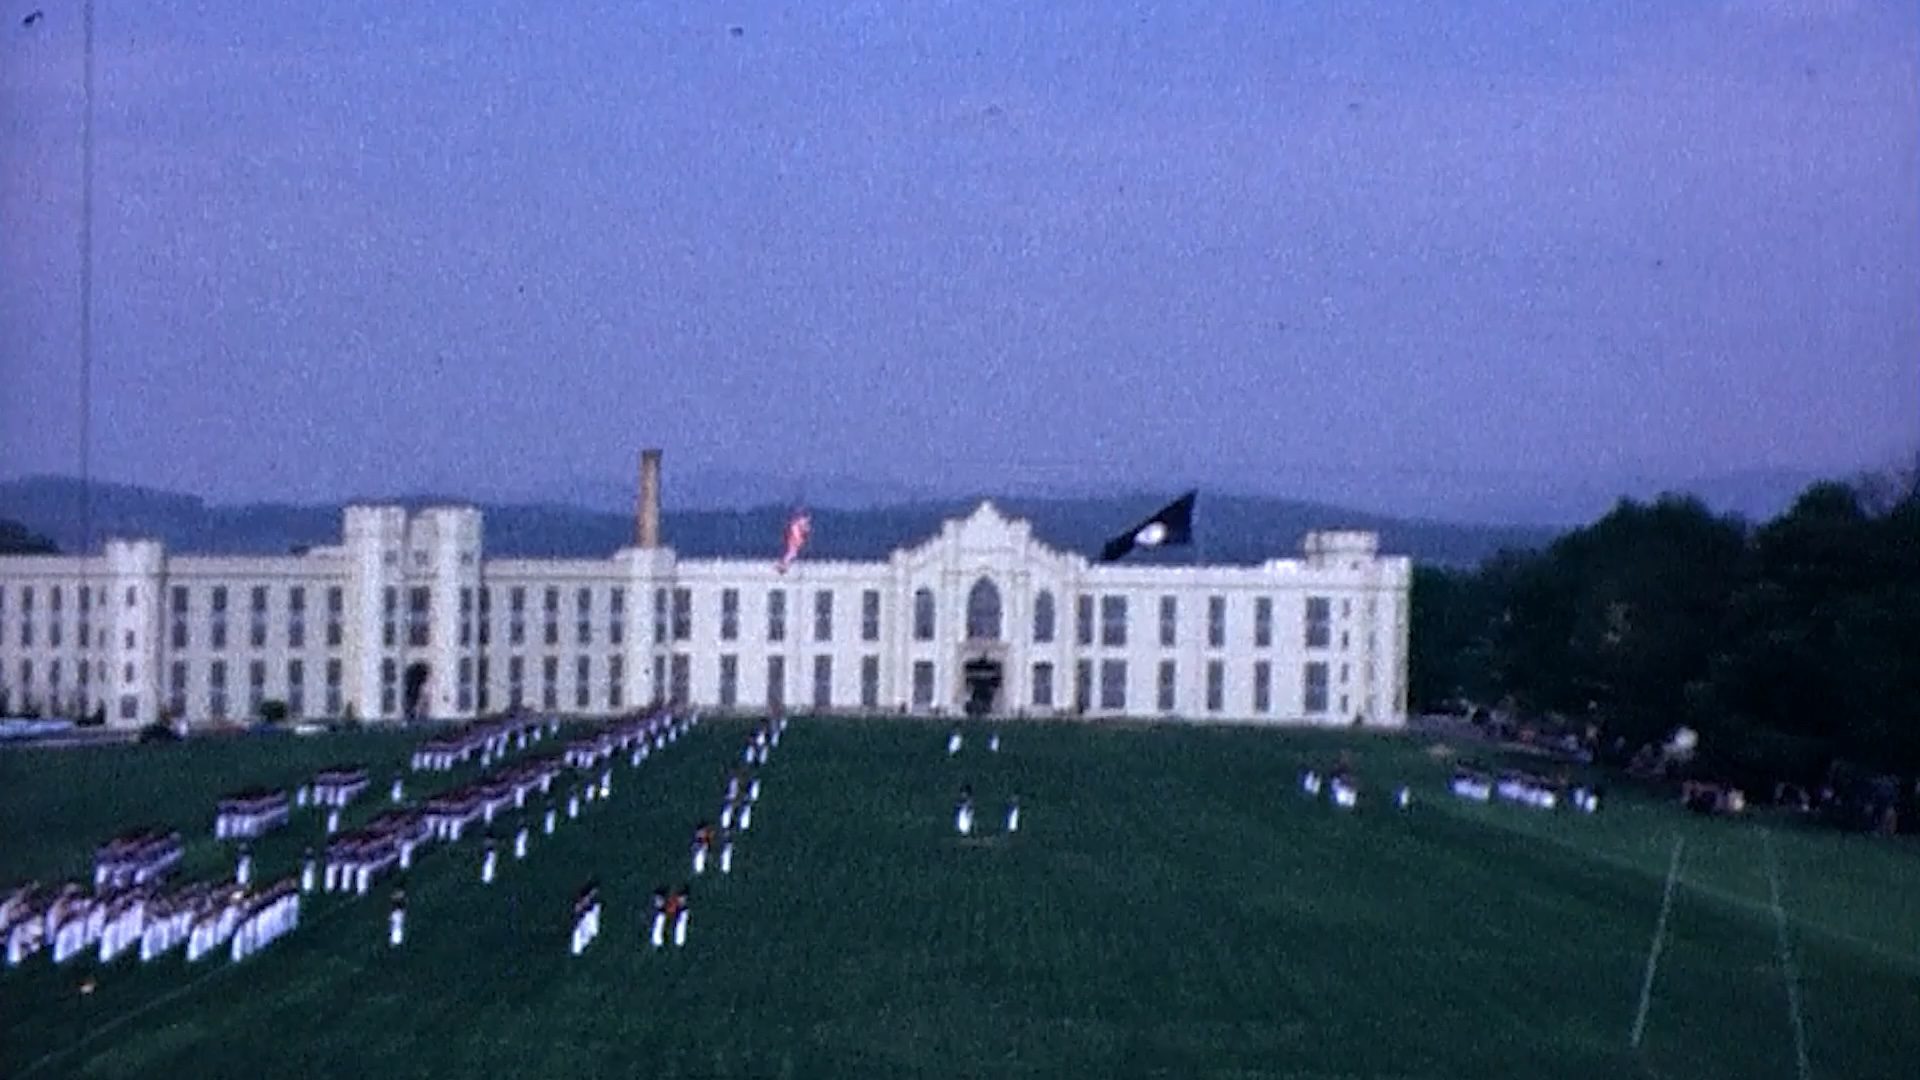 Barracks in the 1960's or 1970's